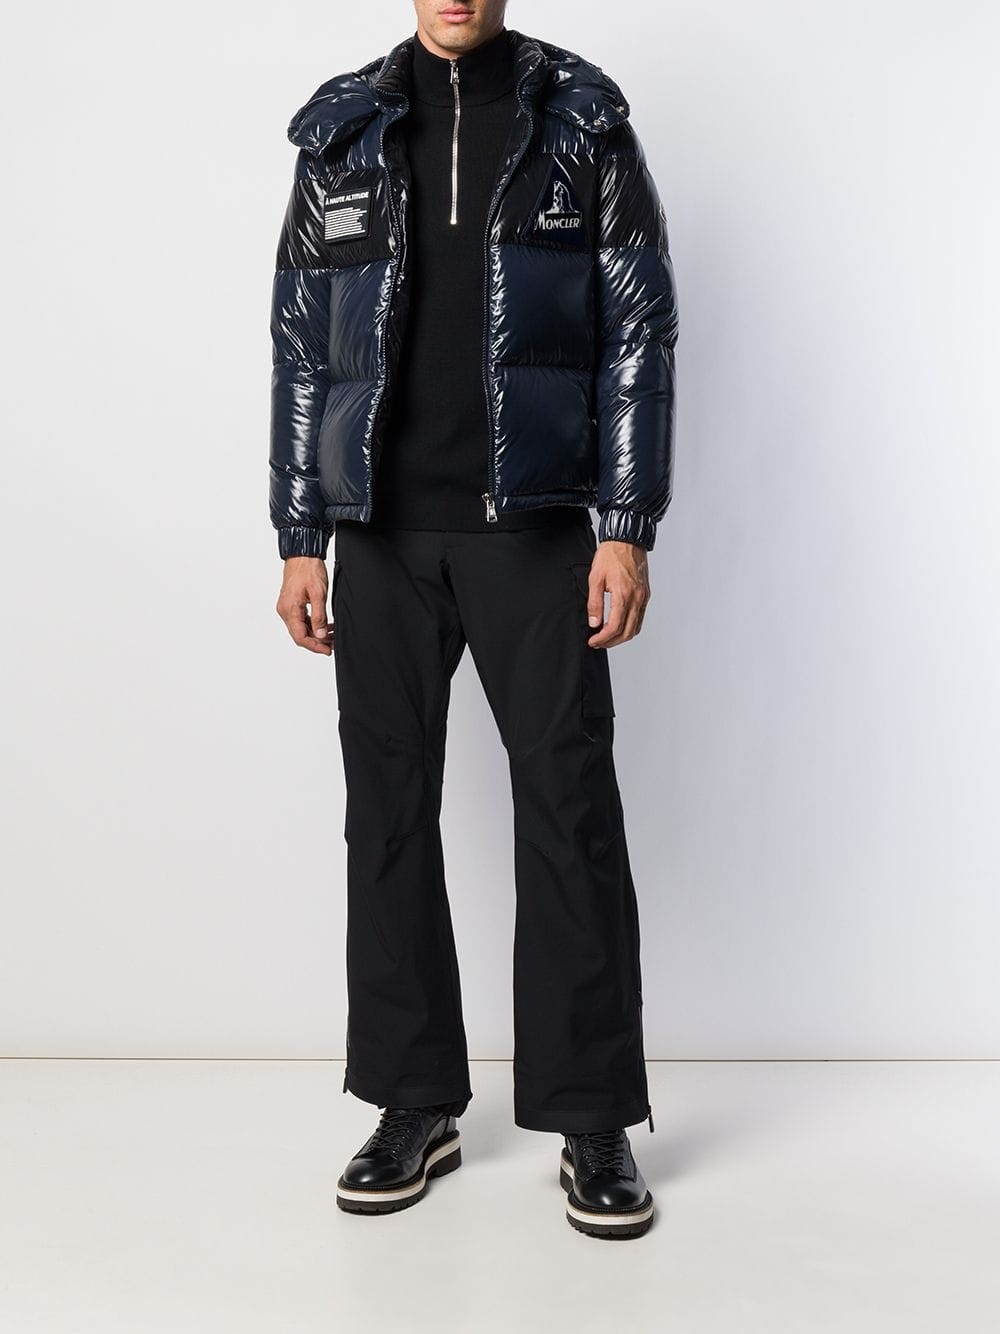 moncler GARY PADDED JACKET available on montiboutique.com - 31140